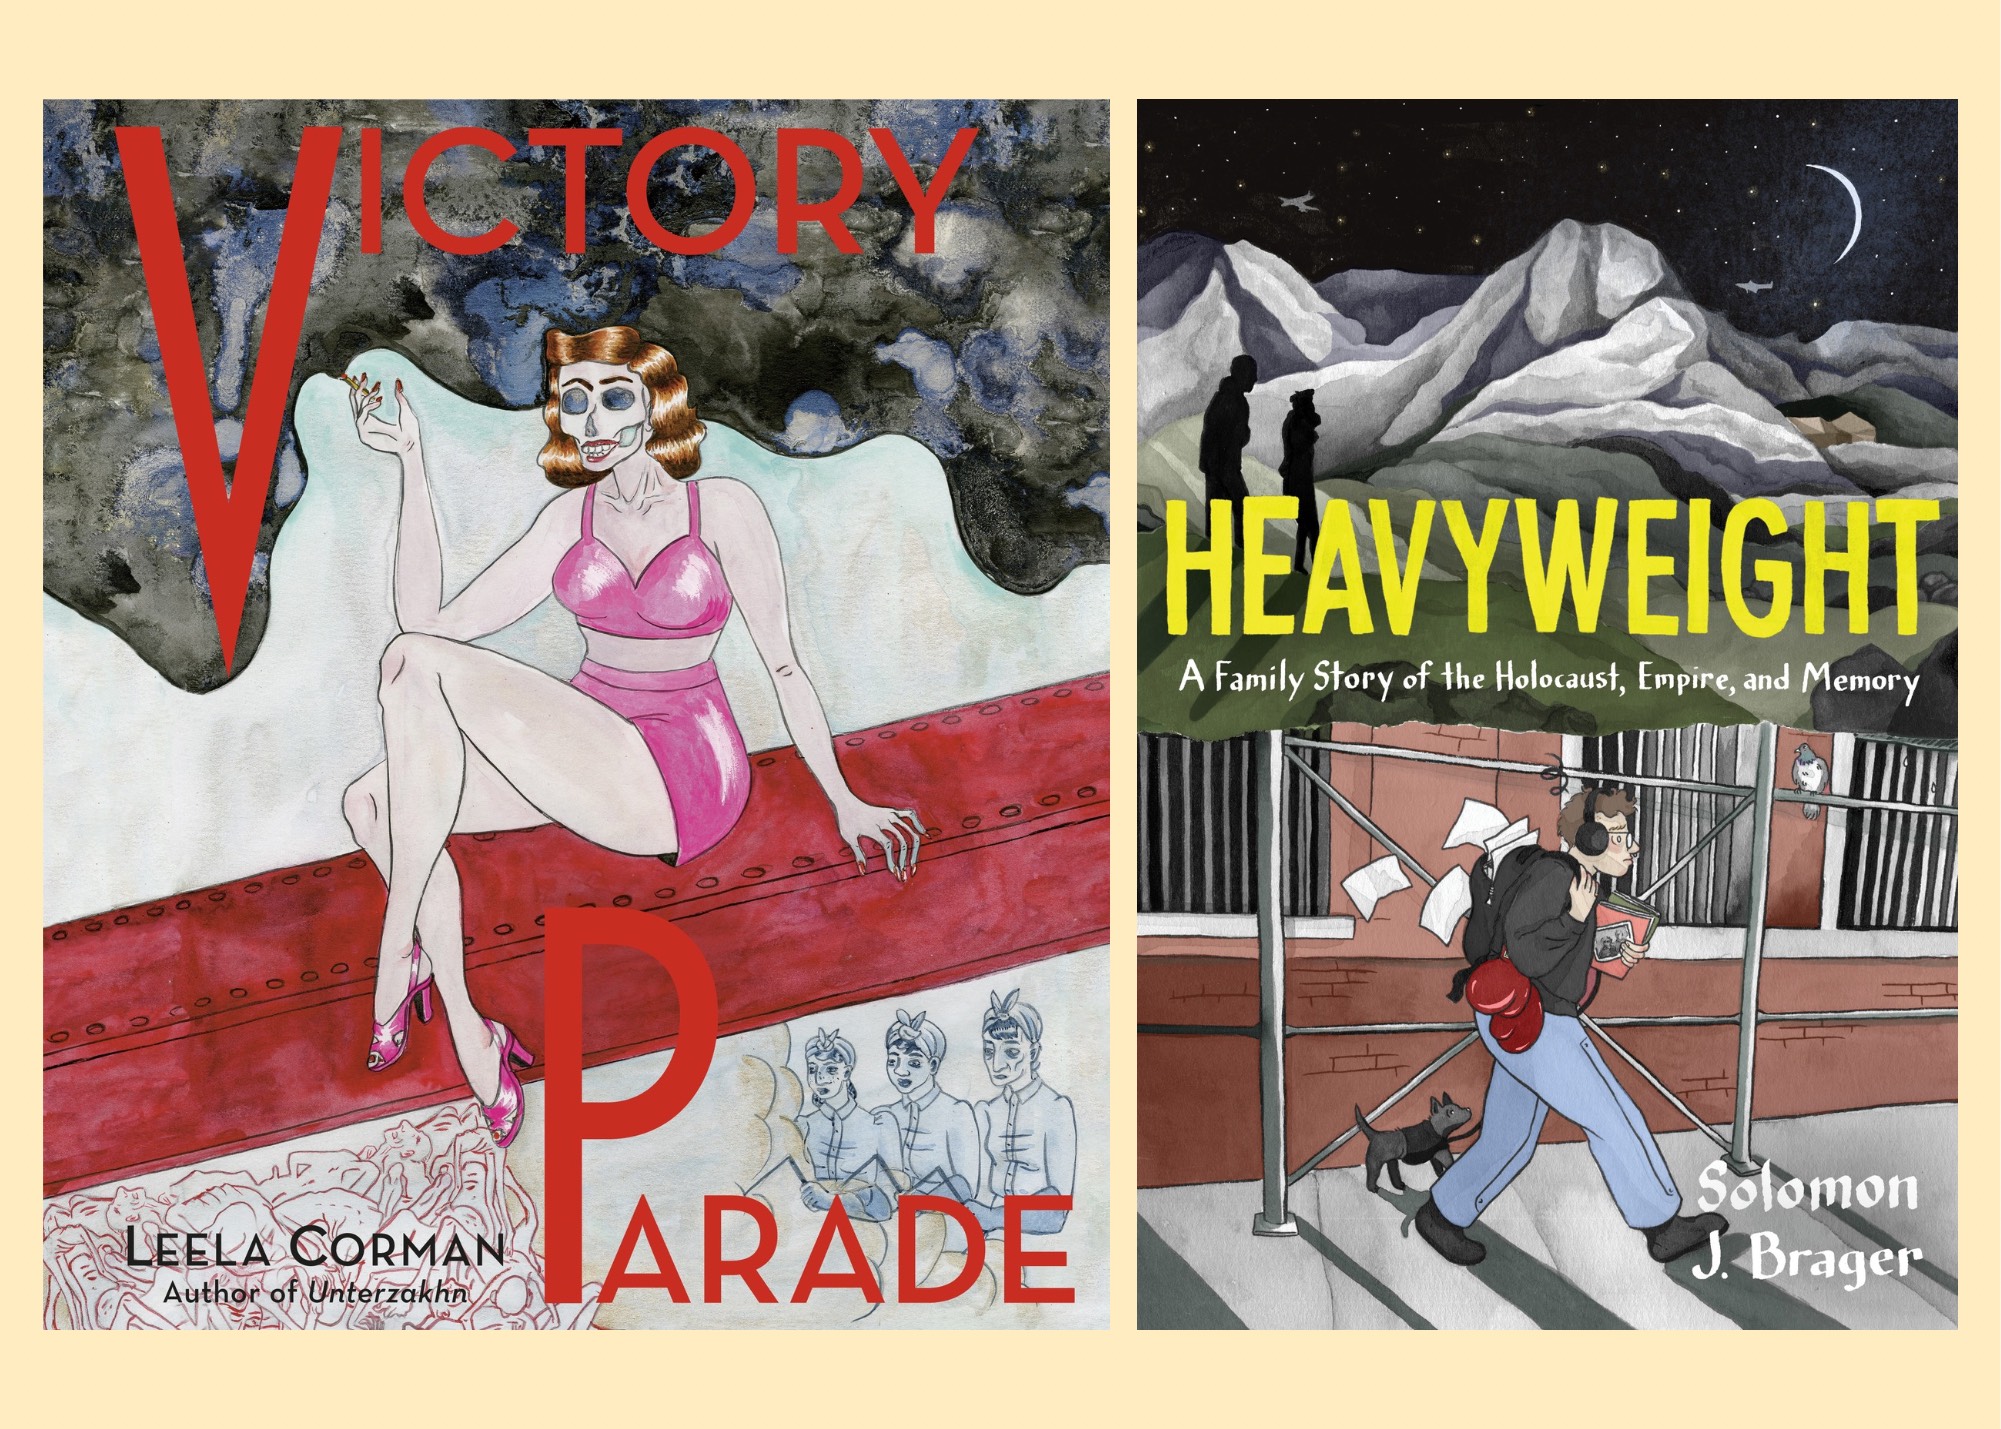 Dual Book Launch: Victory Parade by Leela Corman and Heavyweight by Solomon J. Brager with Arielle Angel